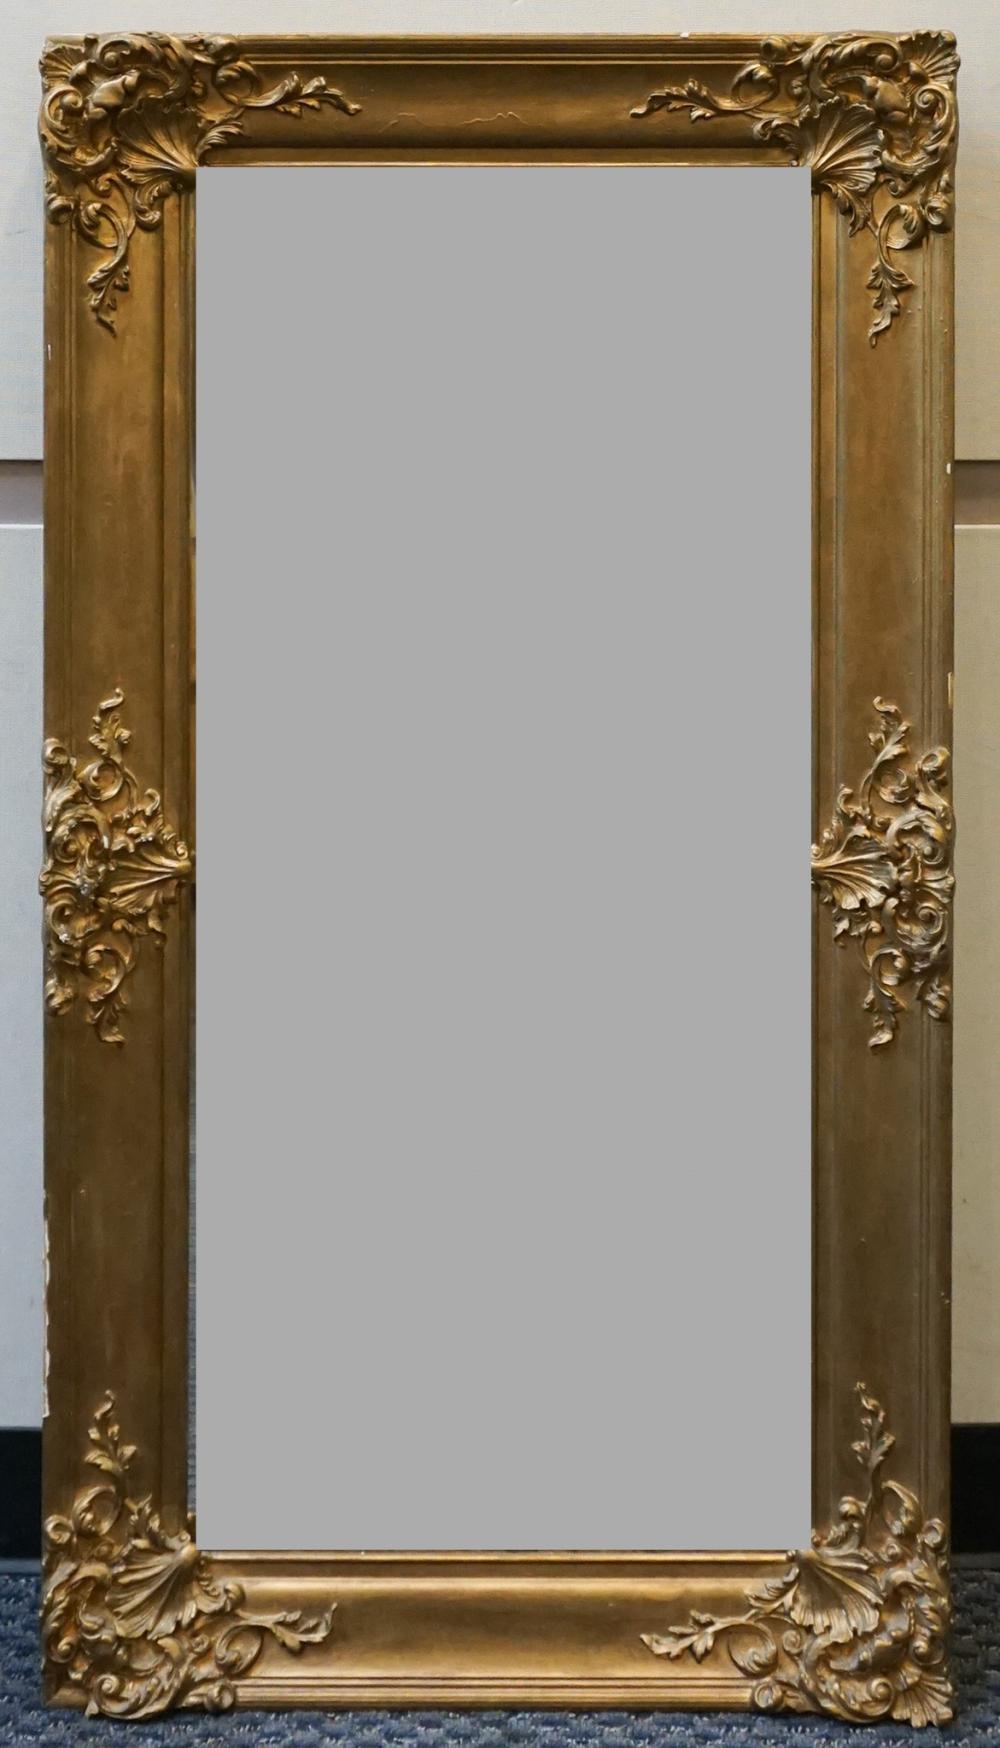 LOUIS XV STYLE GILT DECORATED BEVEL